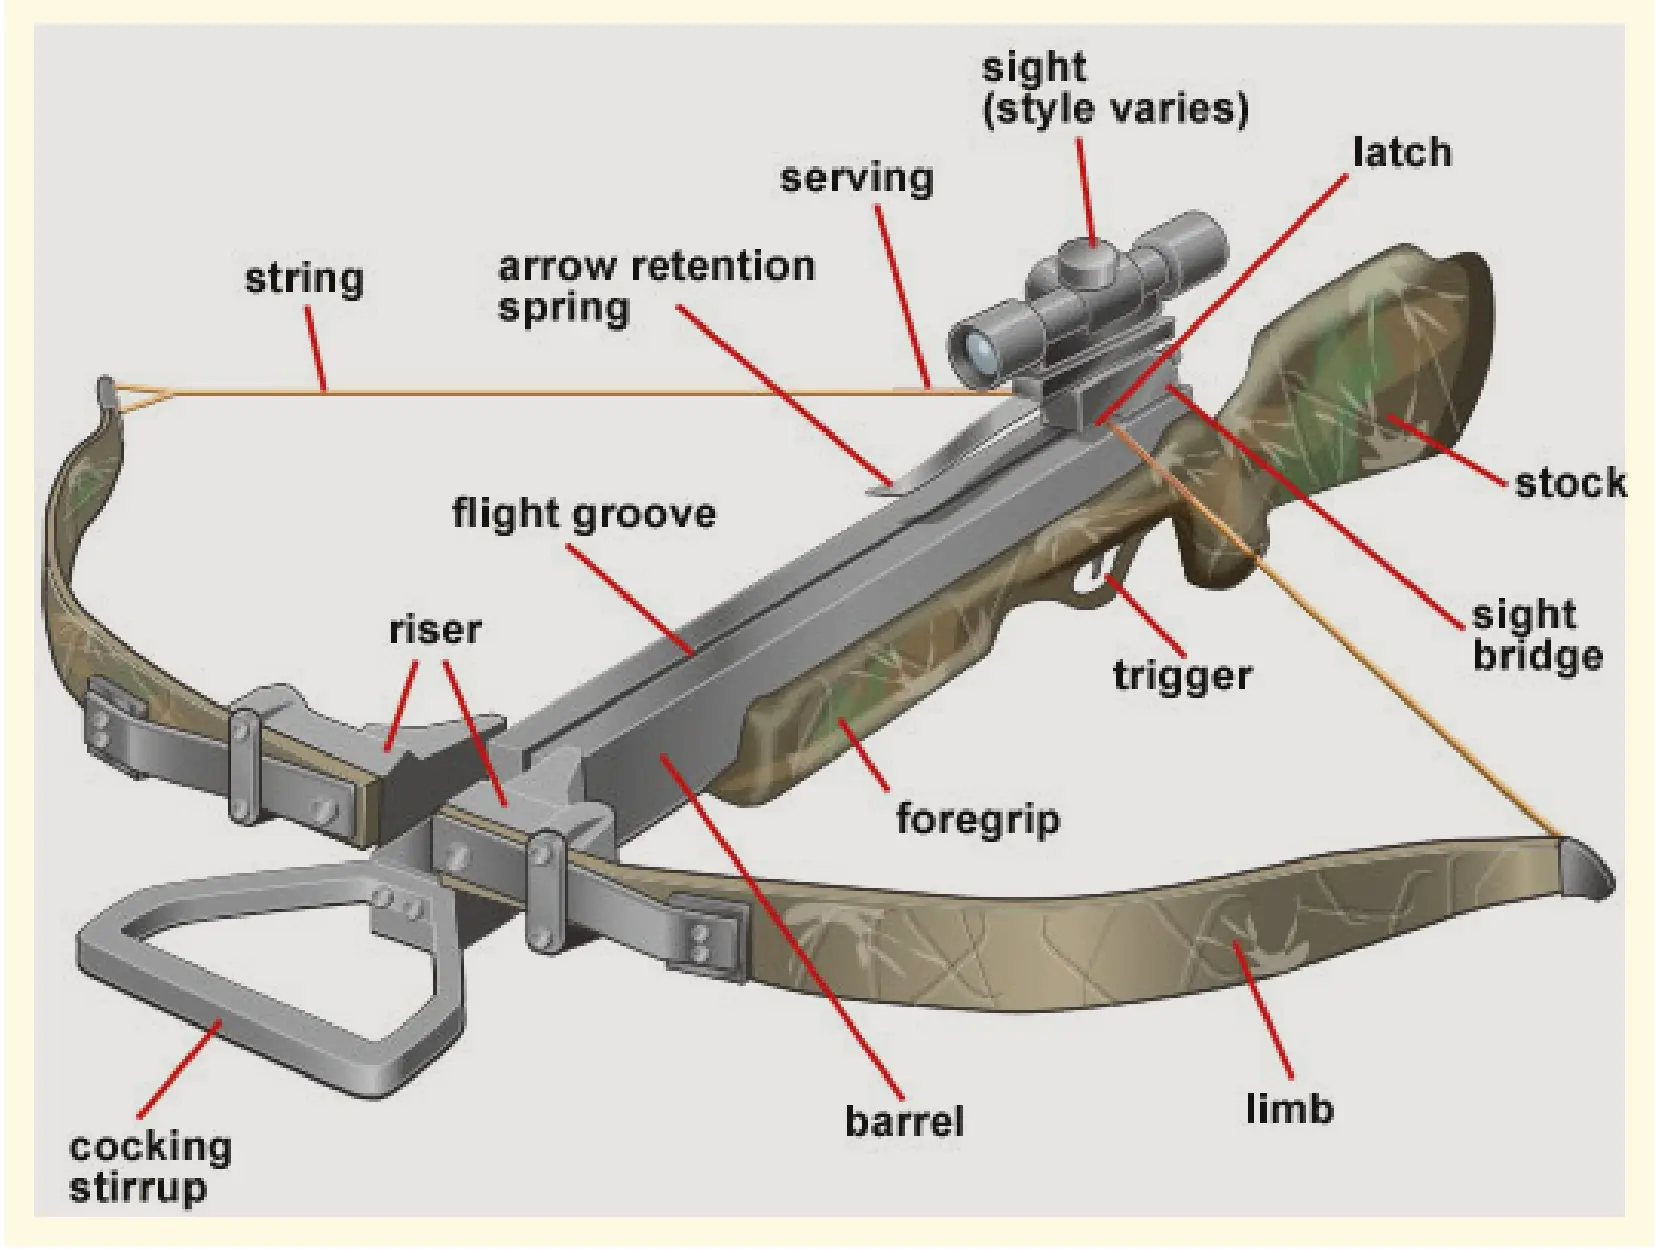 What Describes The Latch On A Crossbow?